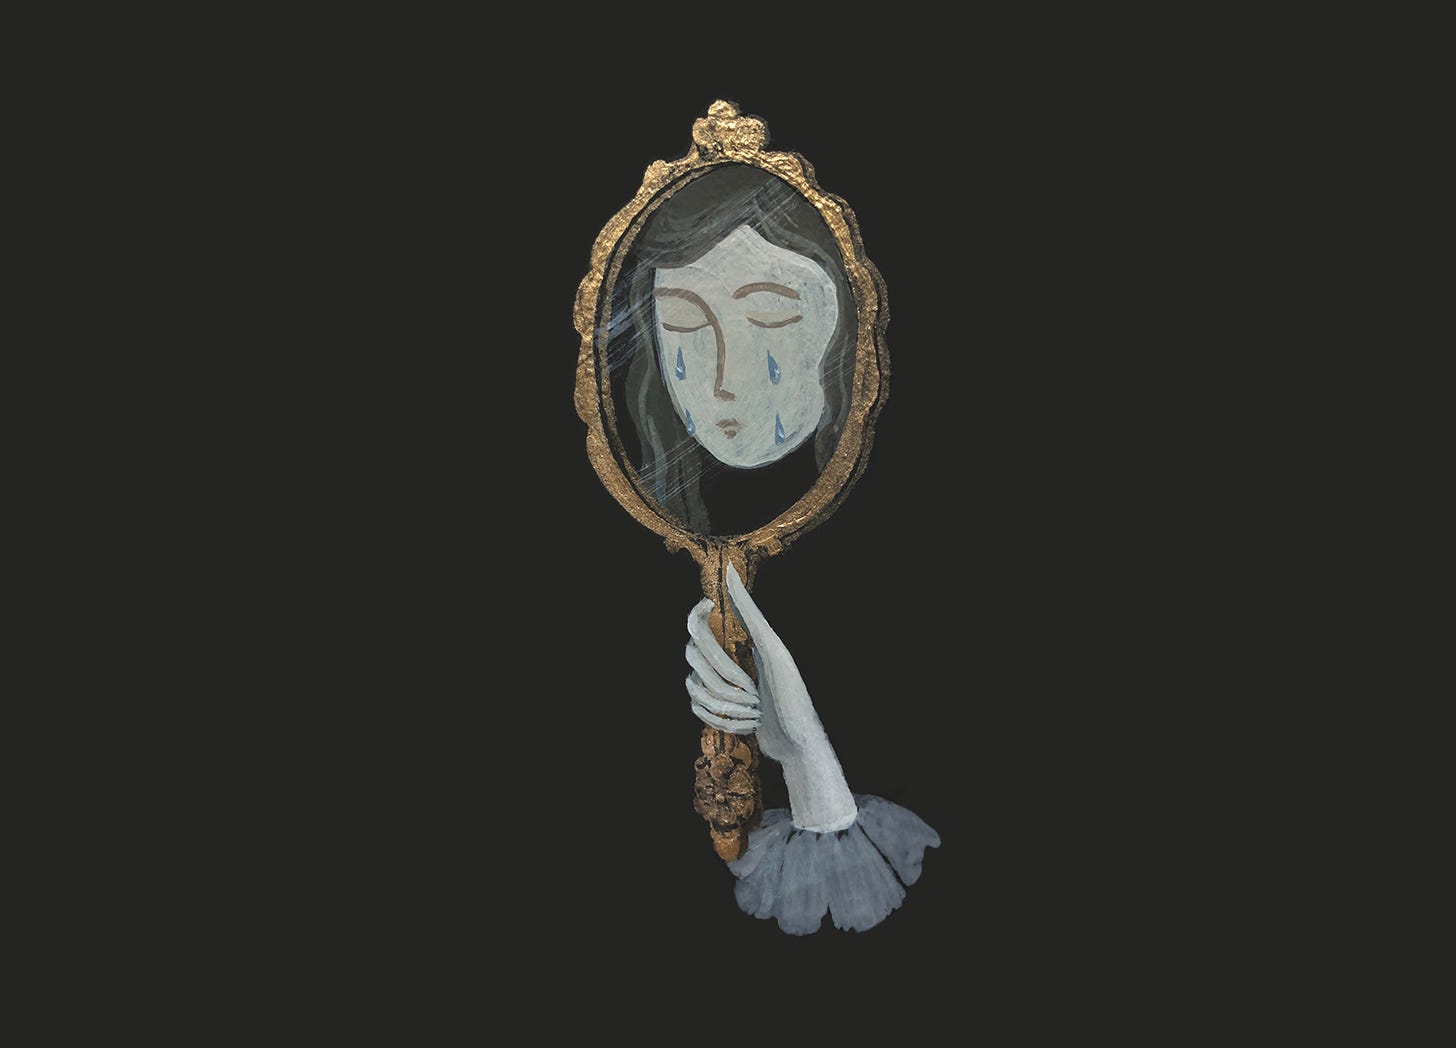 A painting of a pale hand holding a gilt-edged mirror against a dark background. Reflected in the mirror is a person’s tearful face.